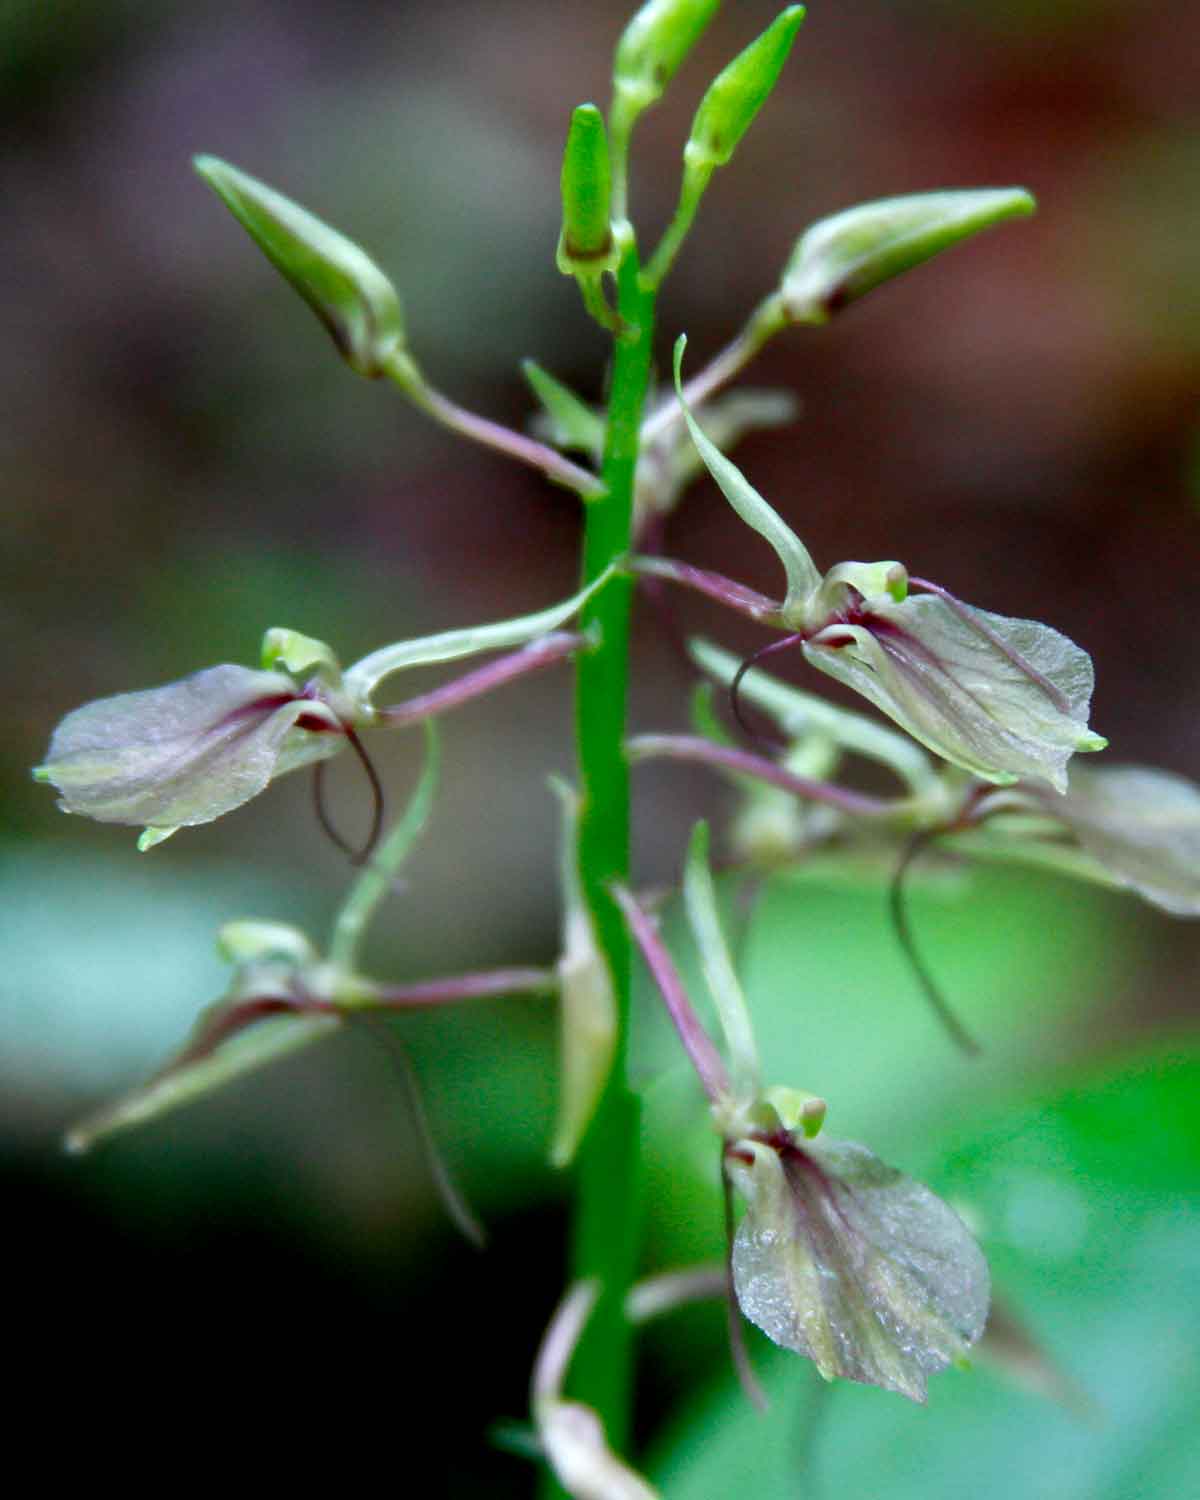 The Twayblade flowers may not be showy, but they're interesting little wild Ozark orchids.